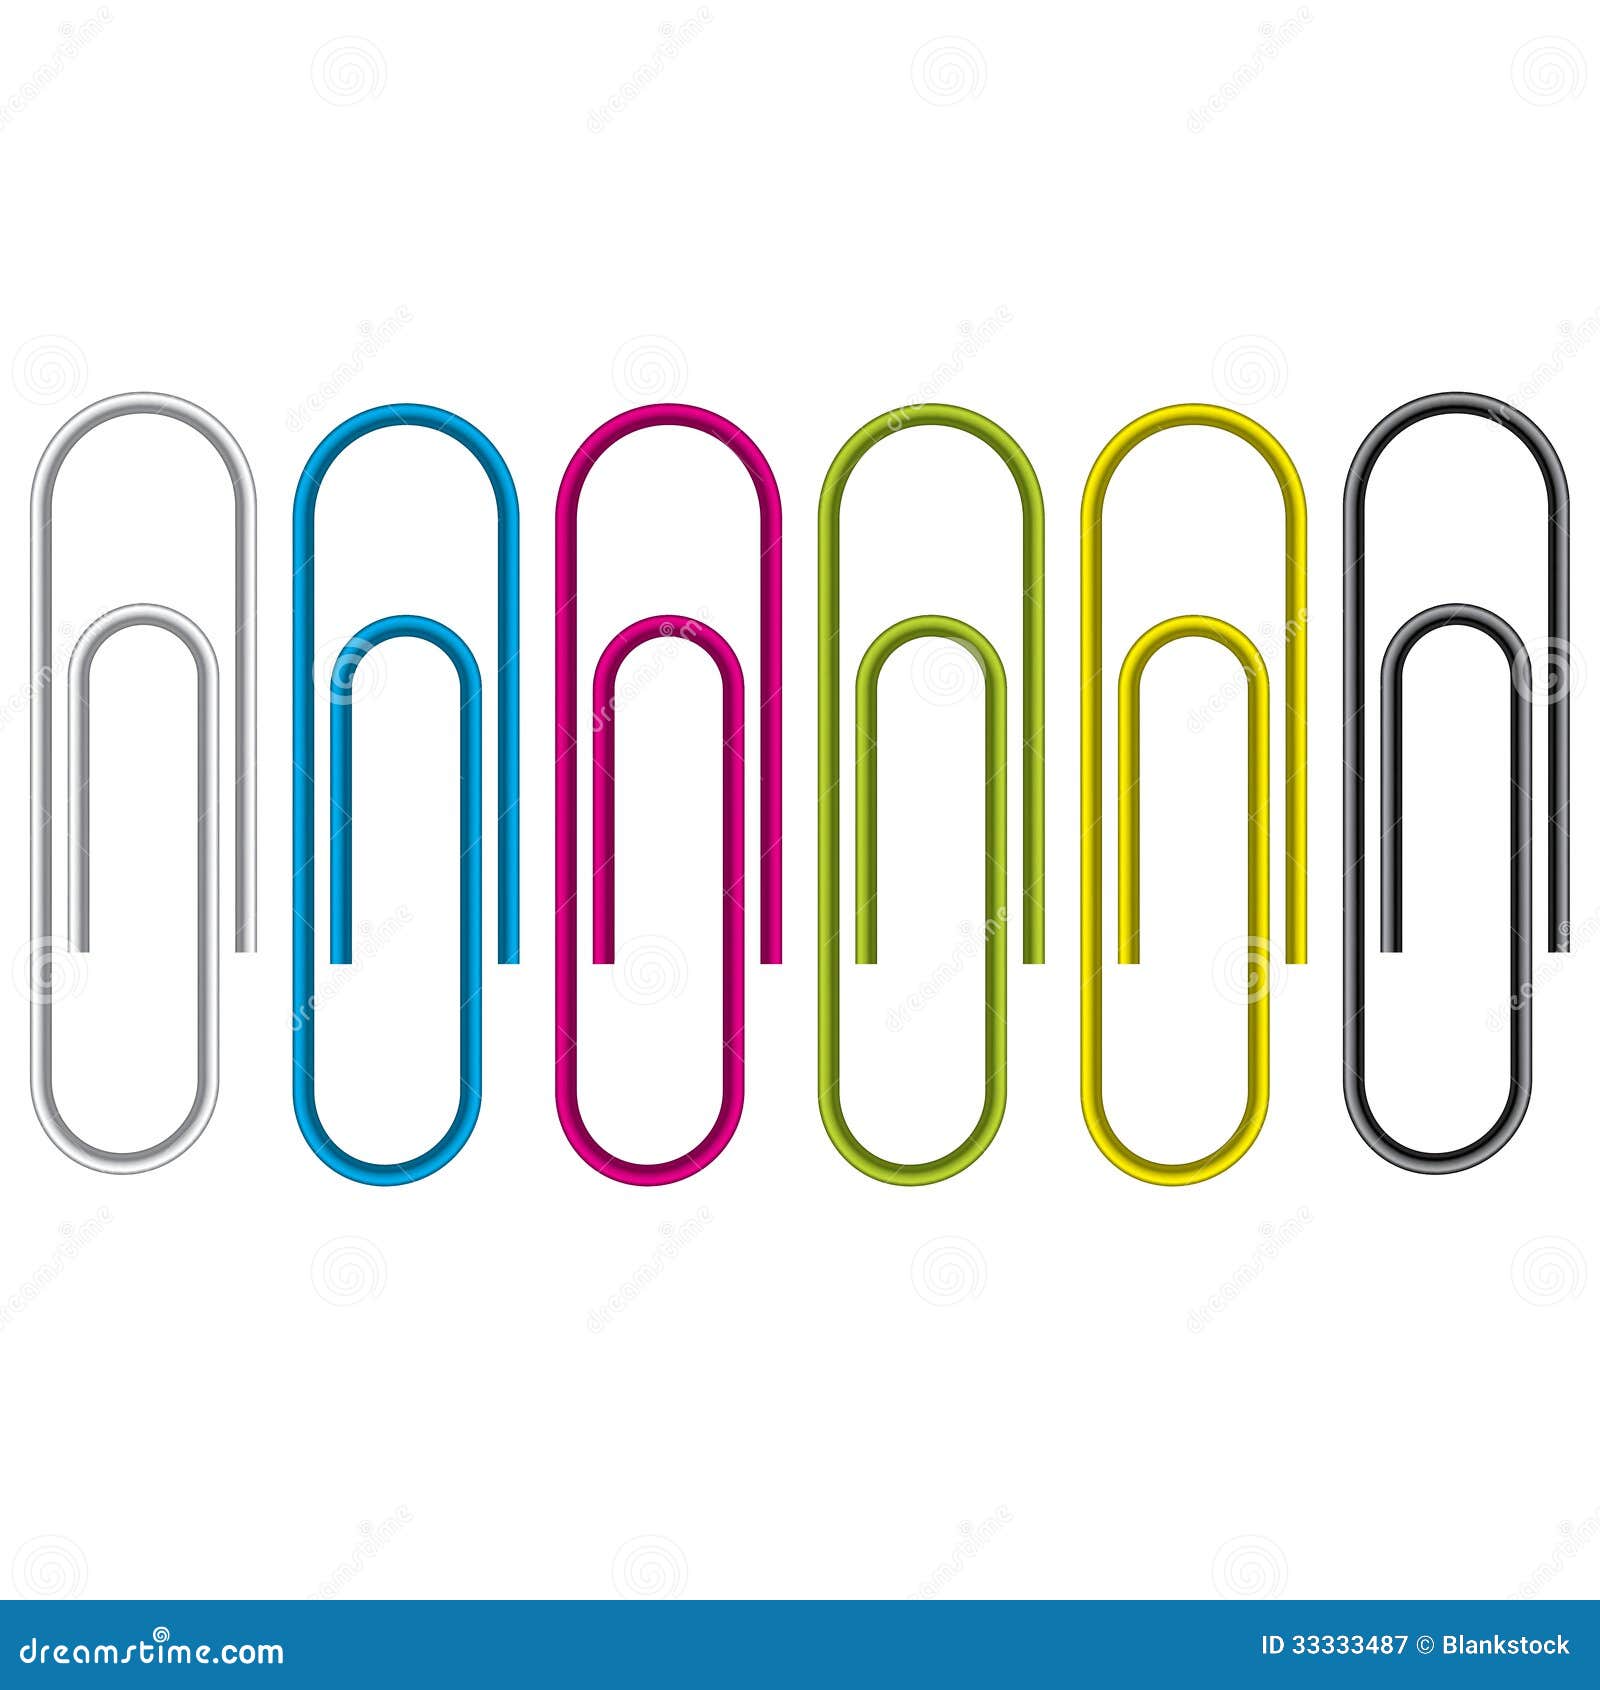 Paper Clip Isolated On White Background. Stock Vector - Illustration of